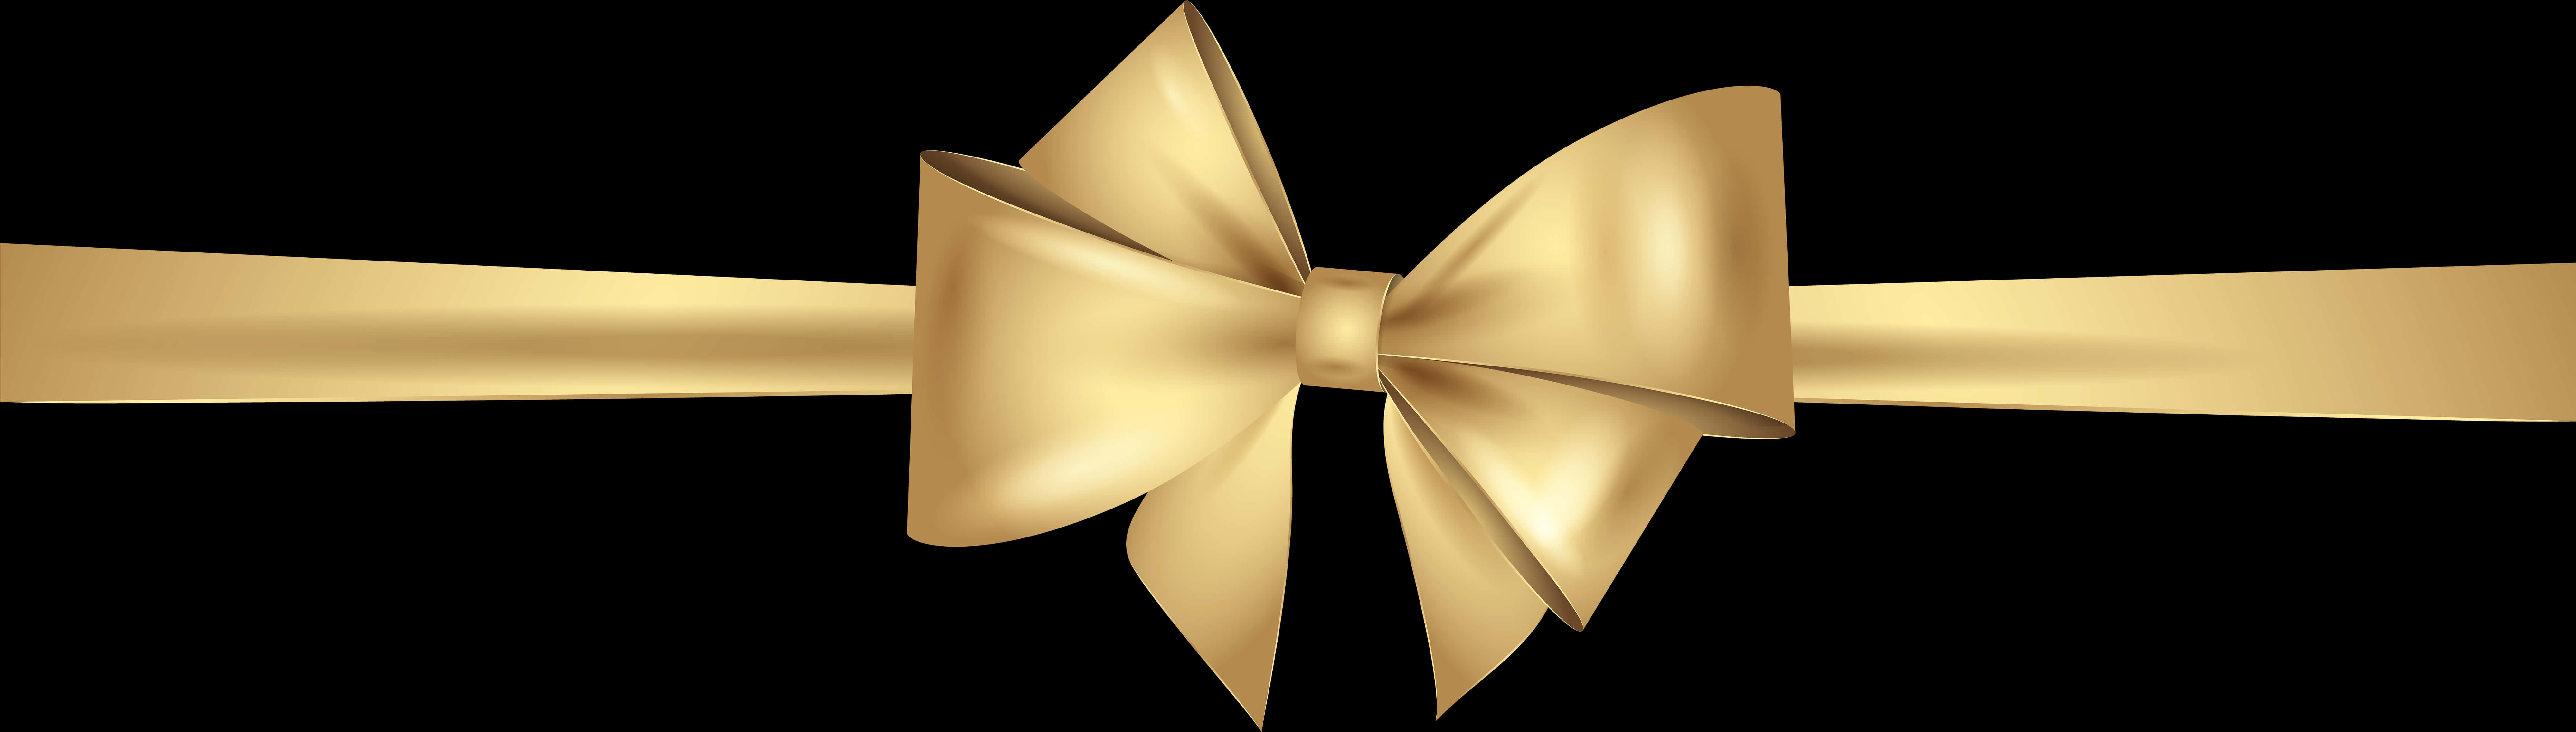 A Gold Bow On A Black Background